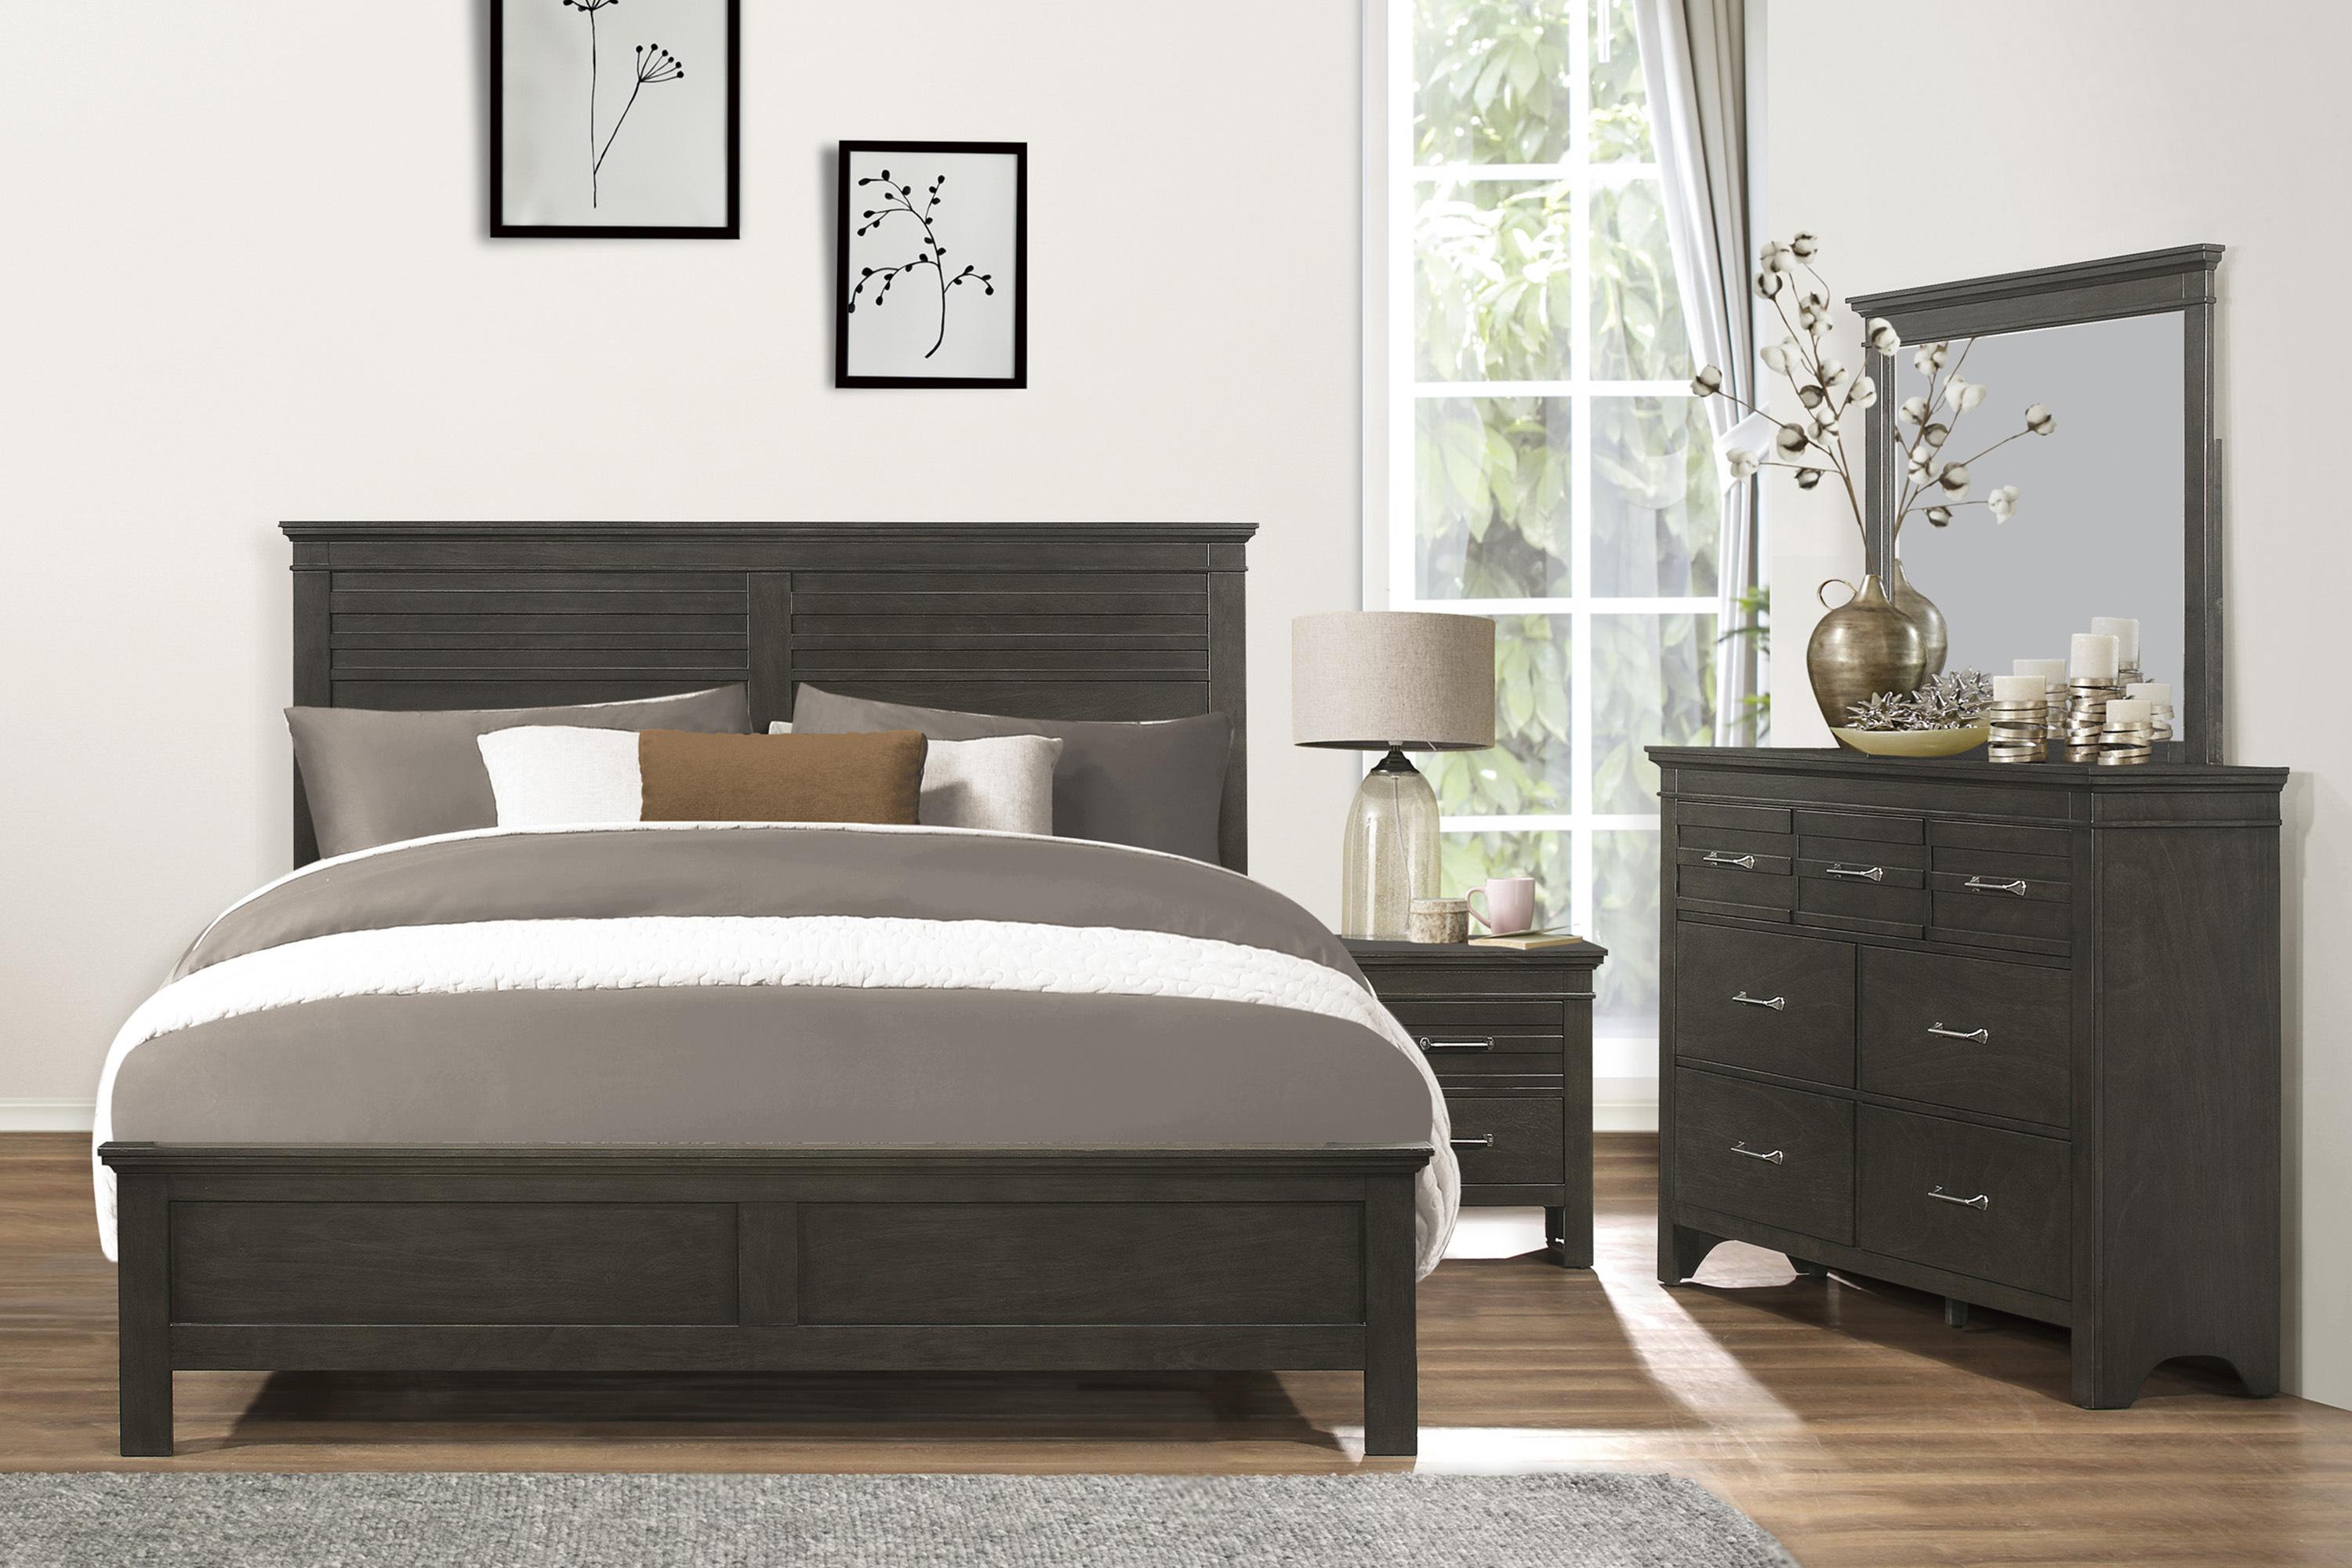 Transitional Bedroom Set 1675K-1CK-5PC Blaire Farm 1675K-1CK-5PC in Charcoal 